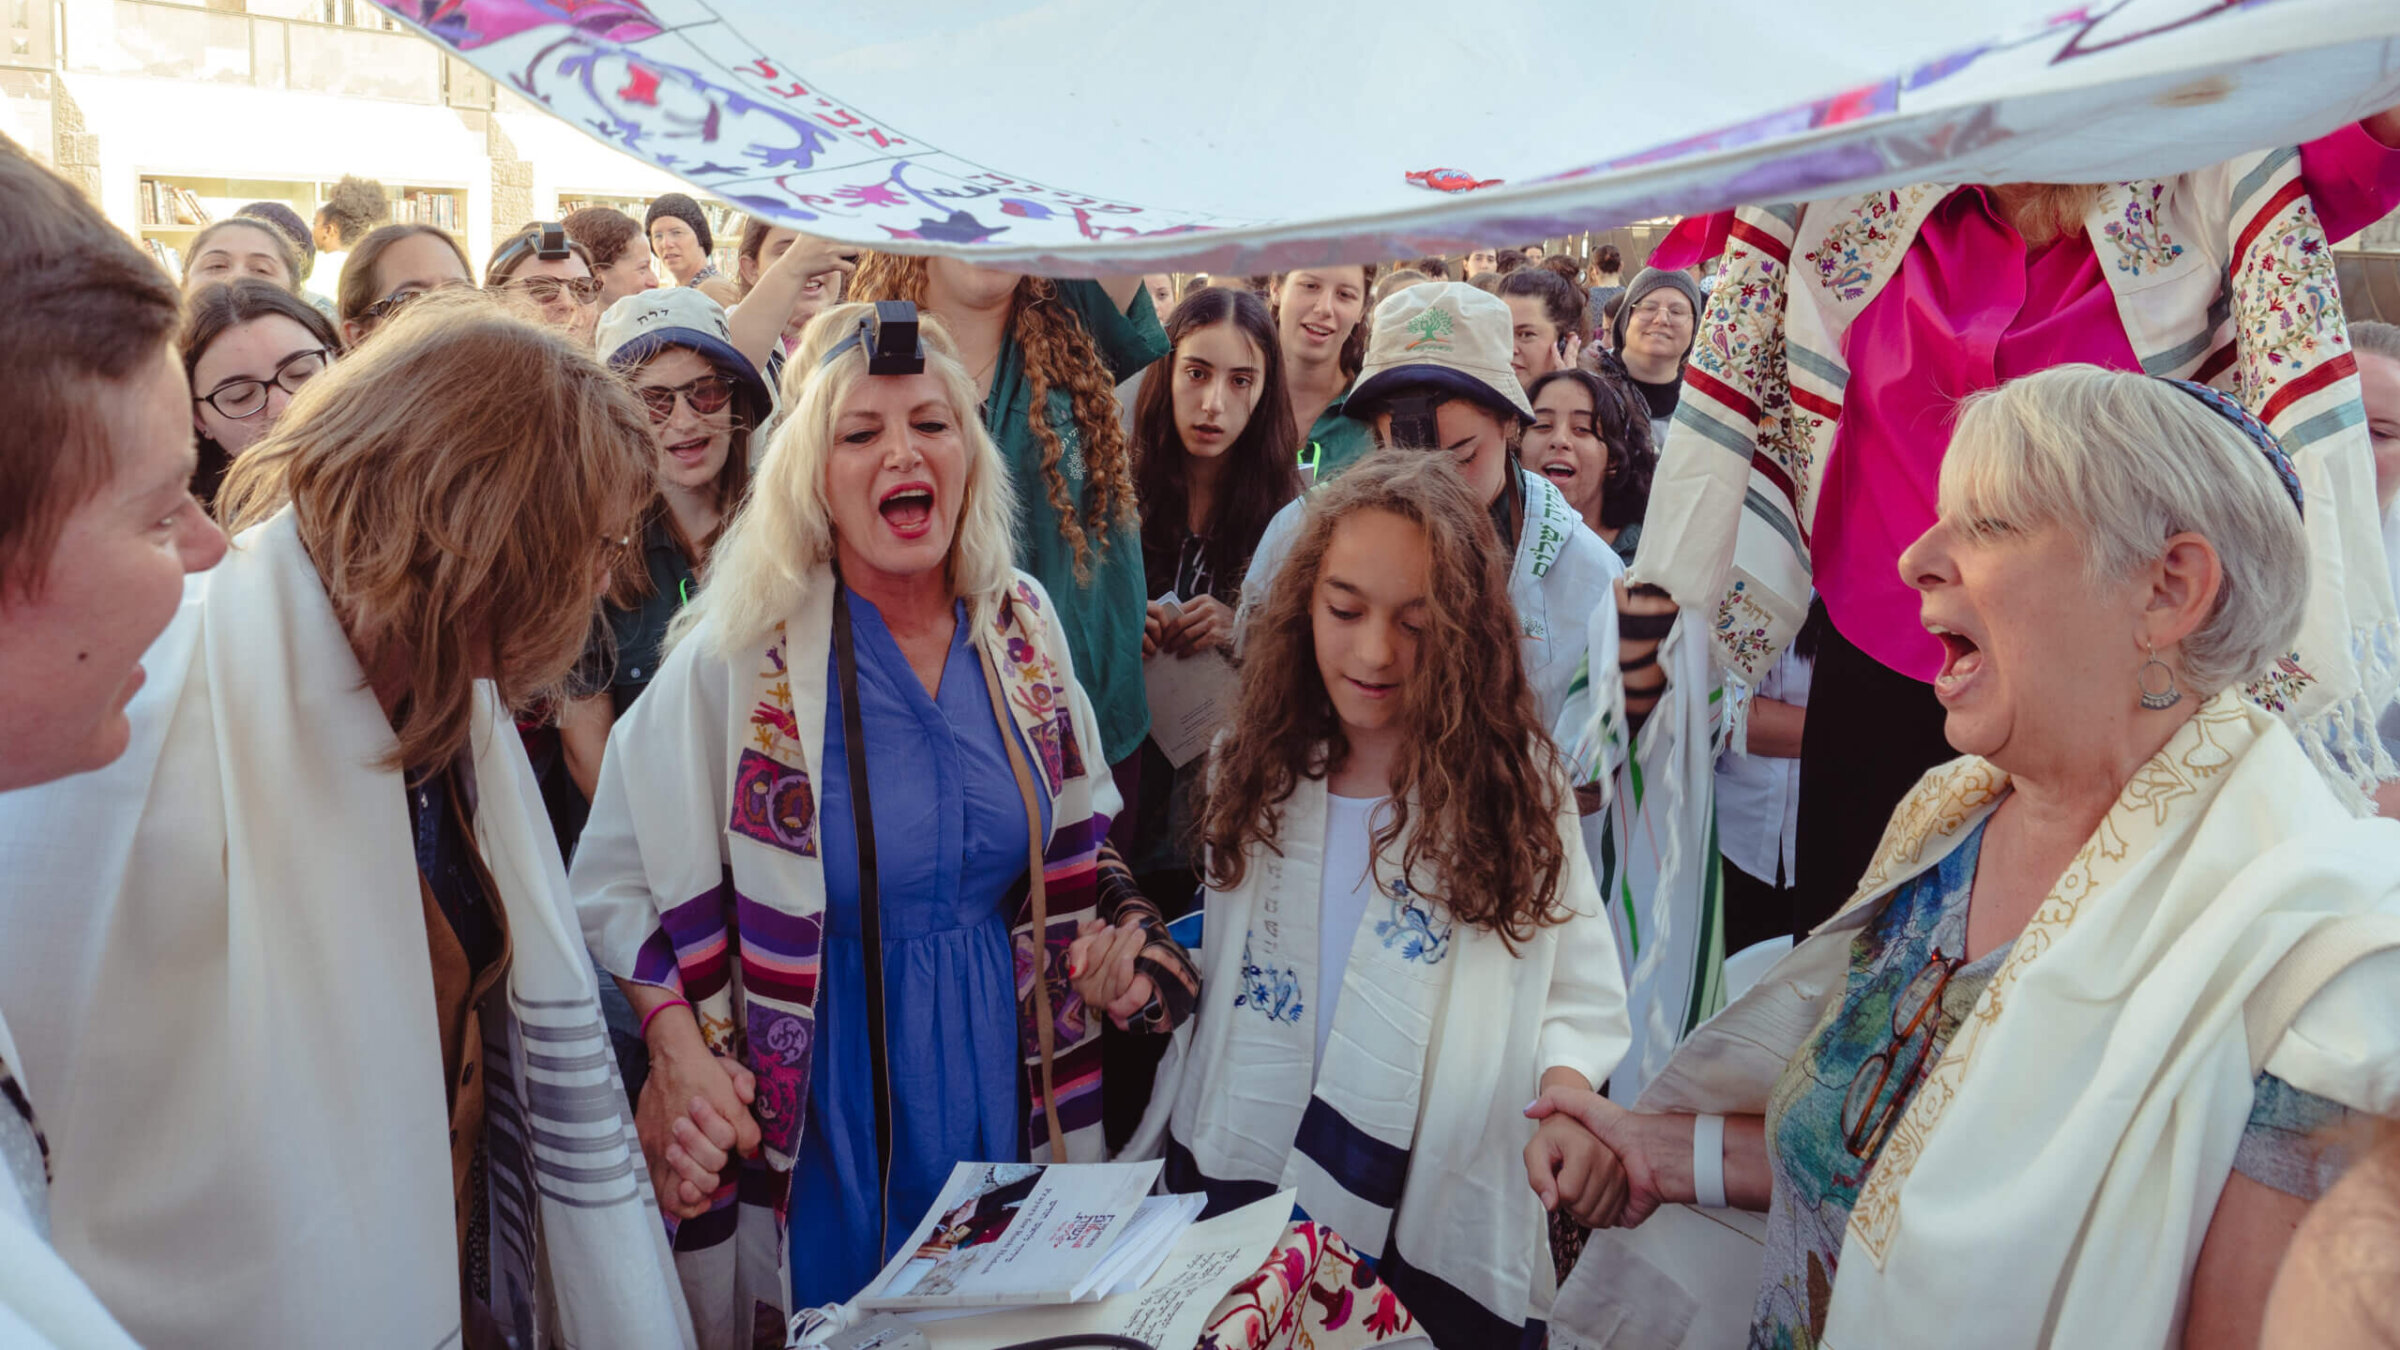 Lucia da Silva, center, prays with Women of the Wall during her bat mitzvah ceremony.